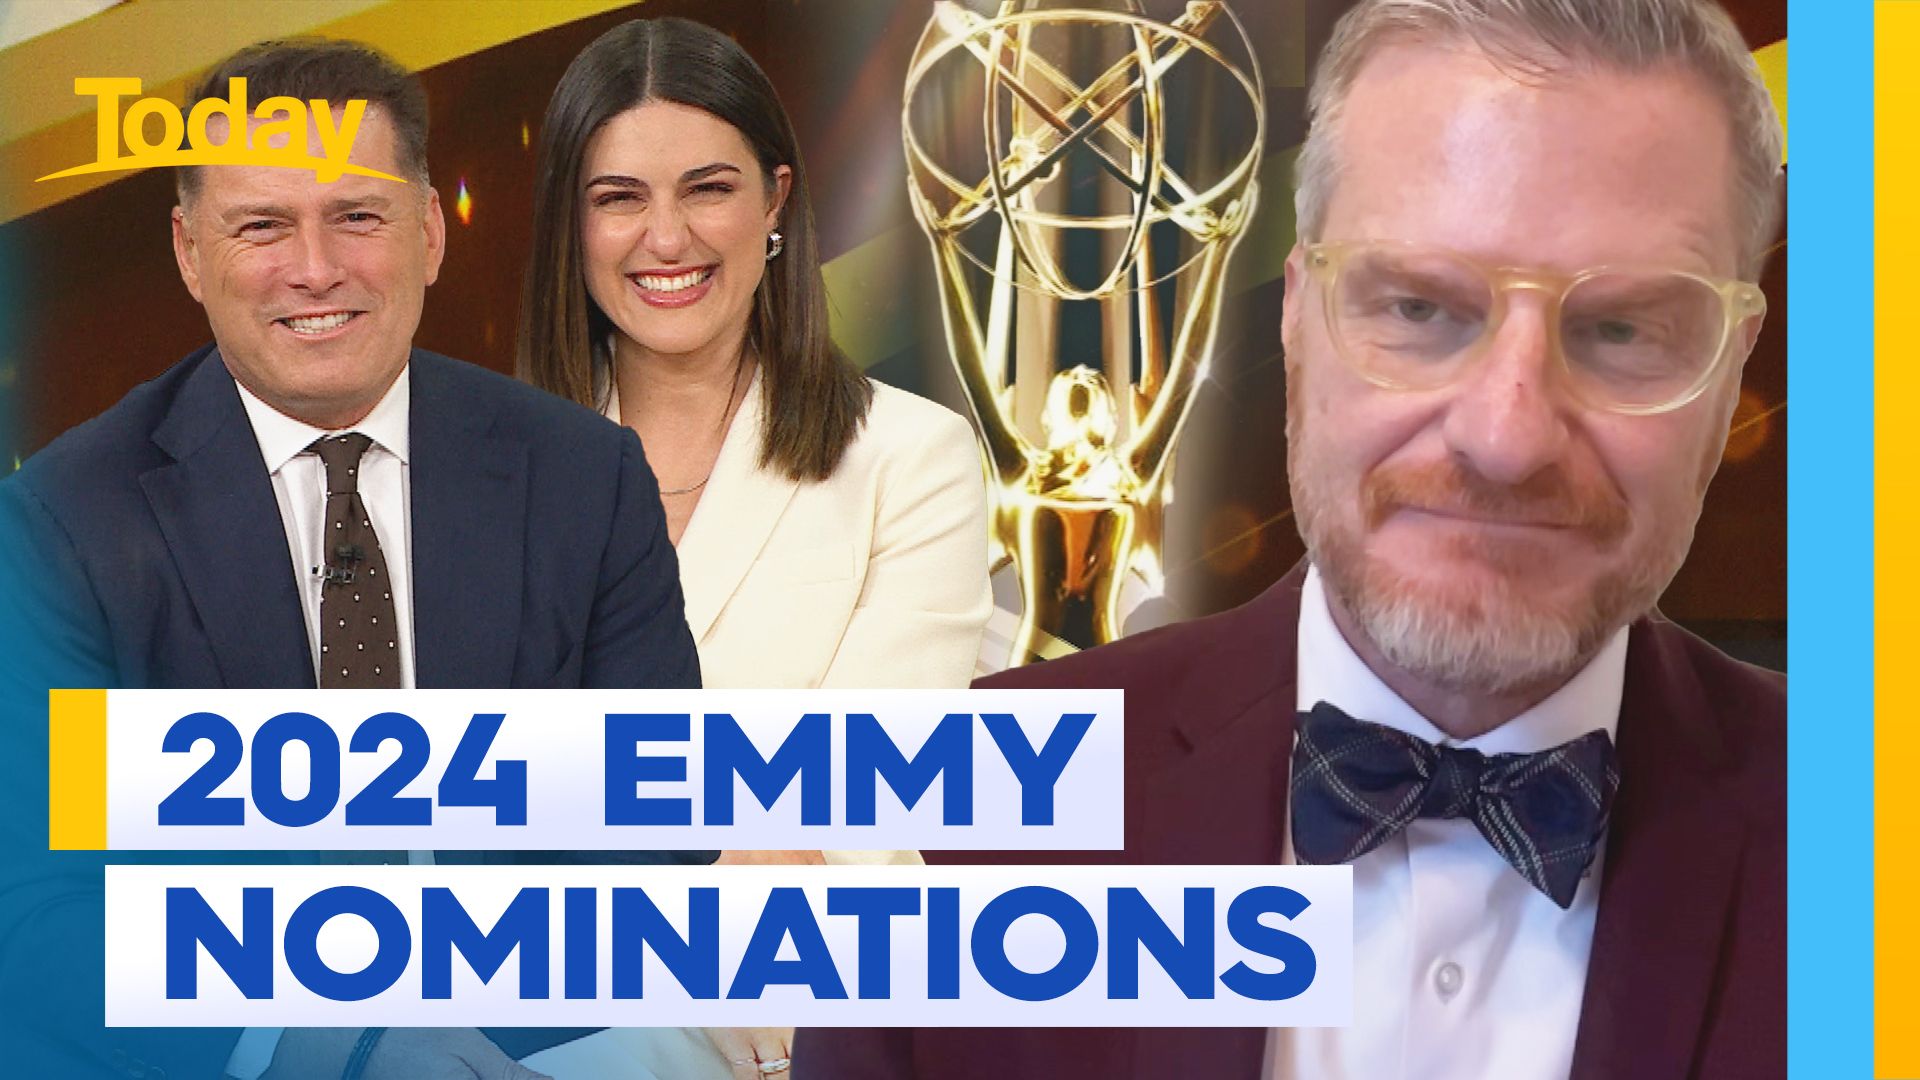 All the big names nominated for this year's Emmys